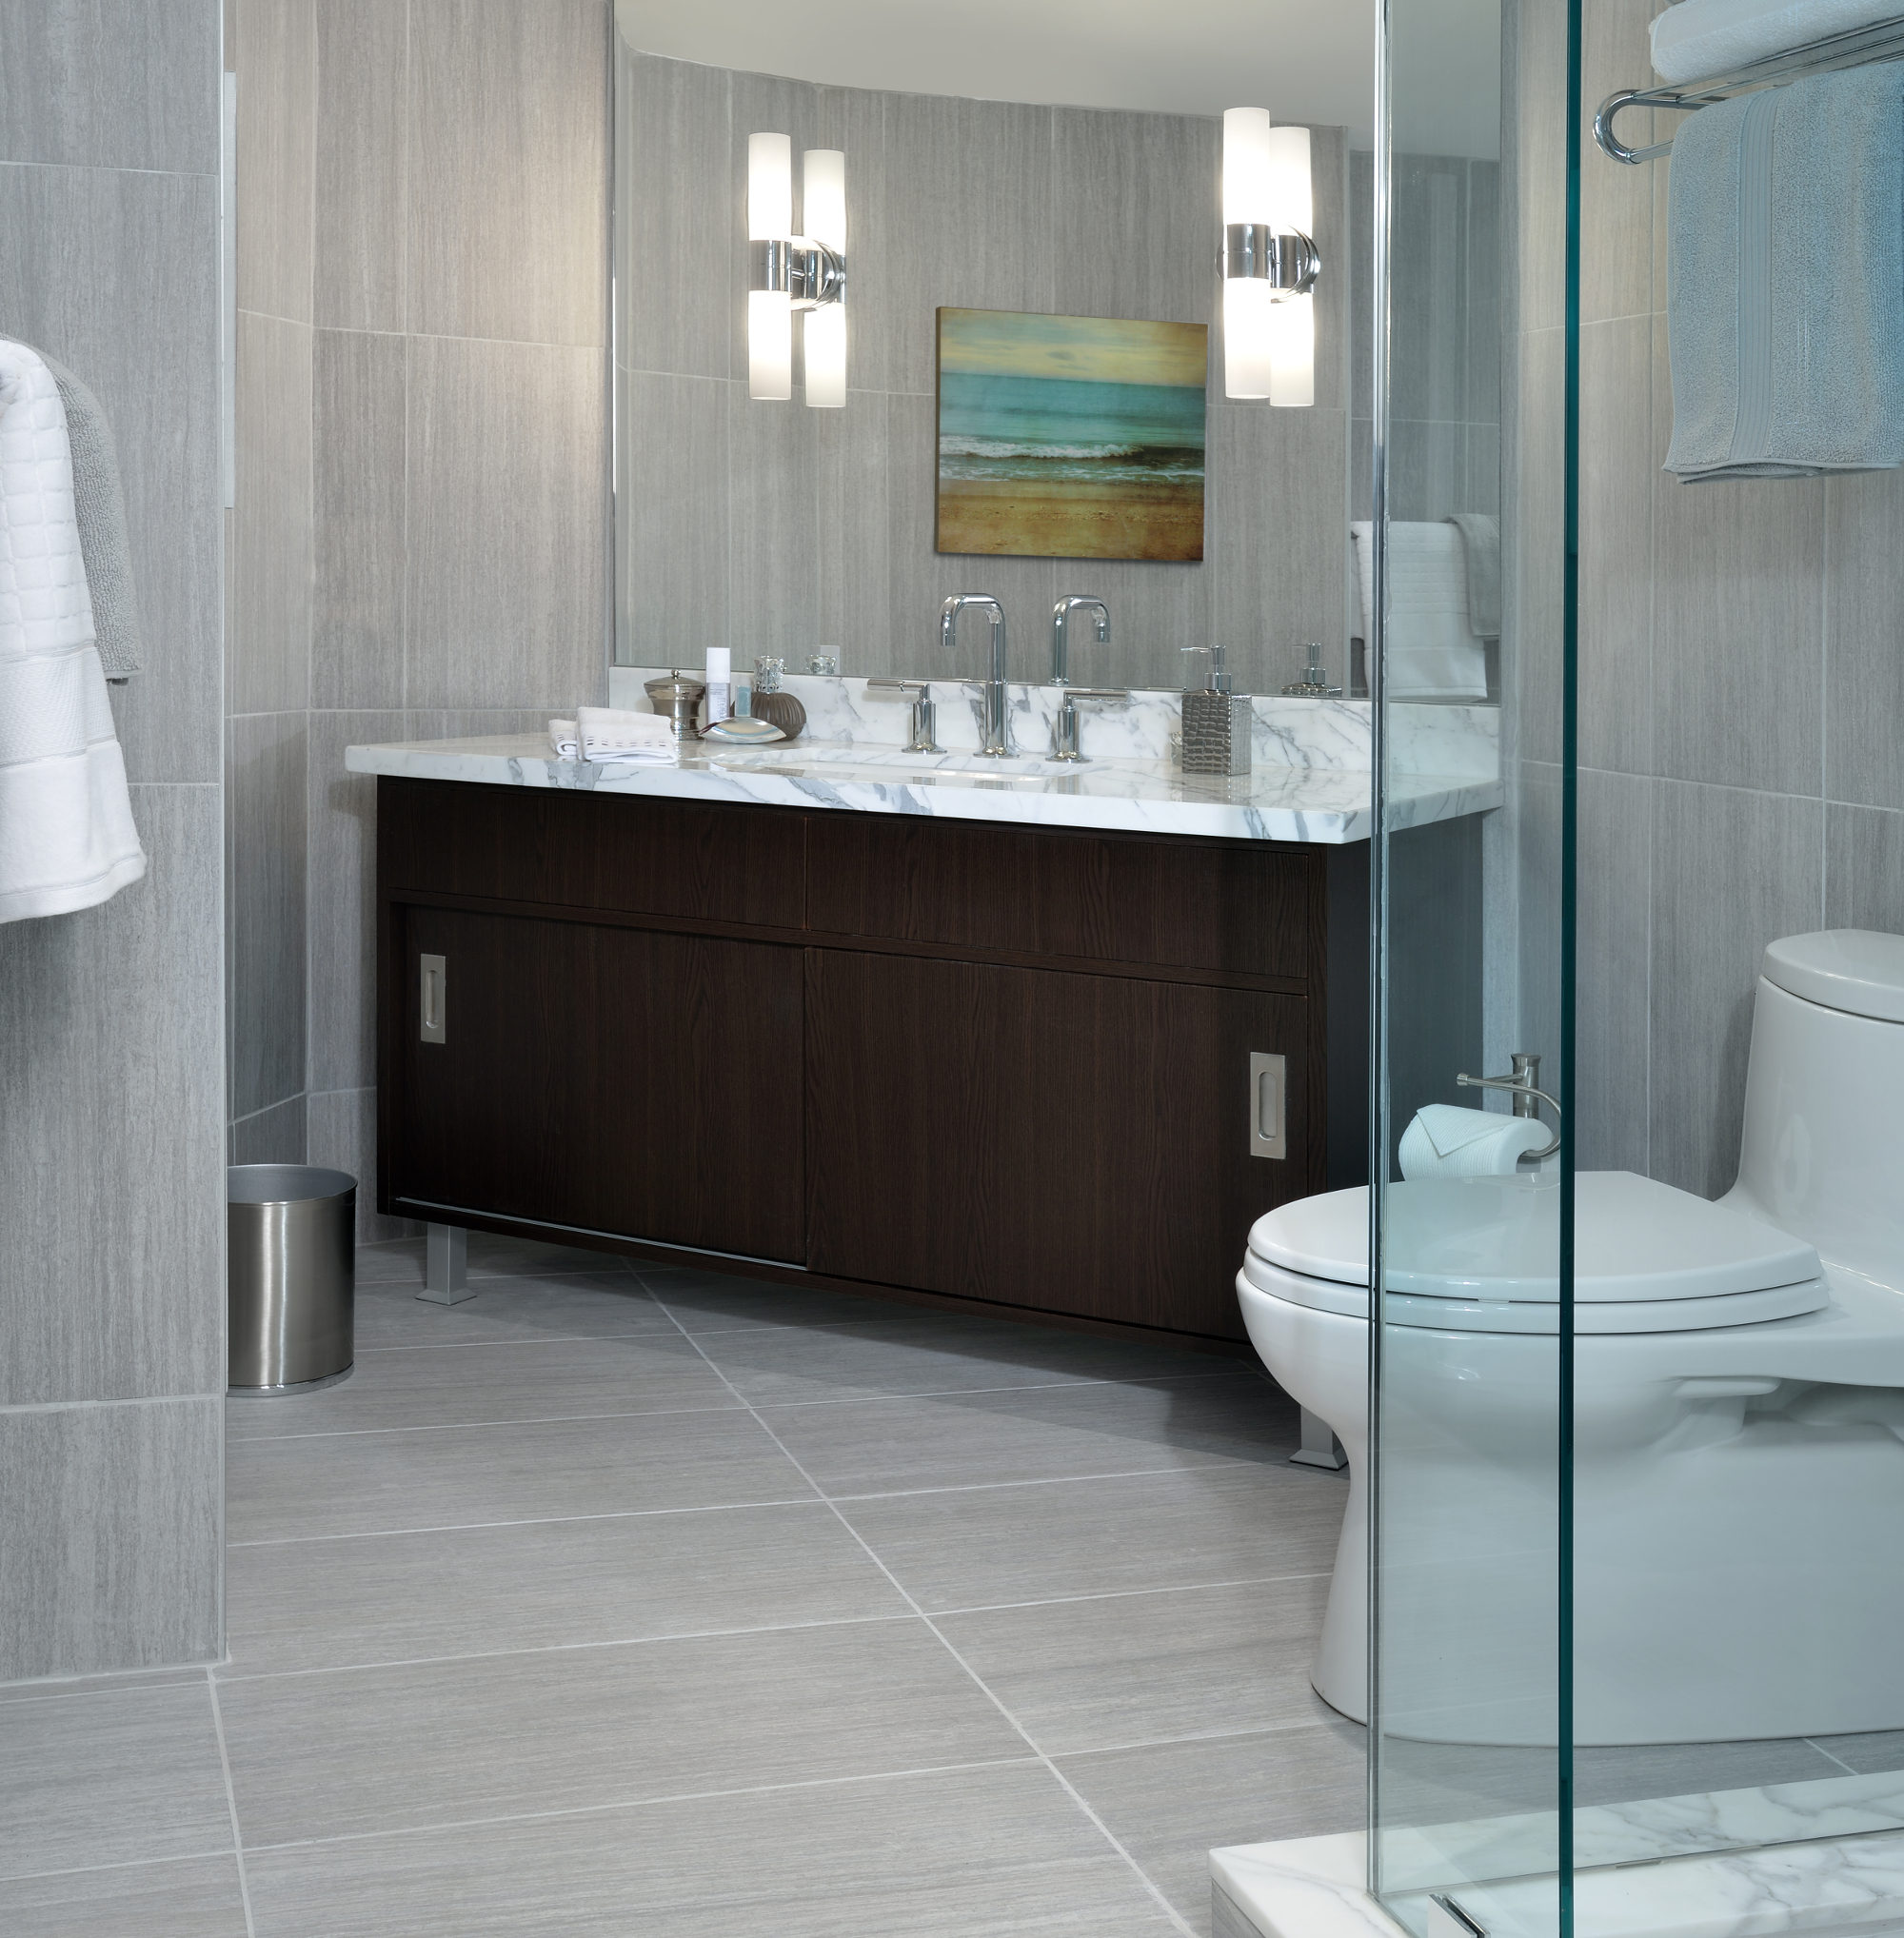 Bathroom Renovation Cost Breakdown, What Is The Average Cost Of A Bathroom Renovation In Canada